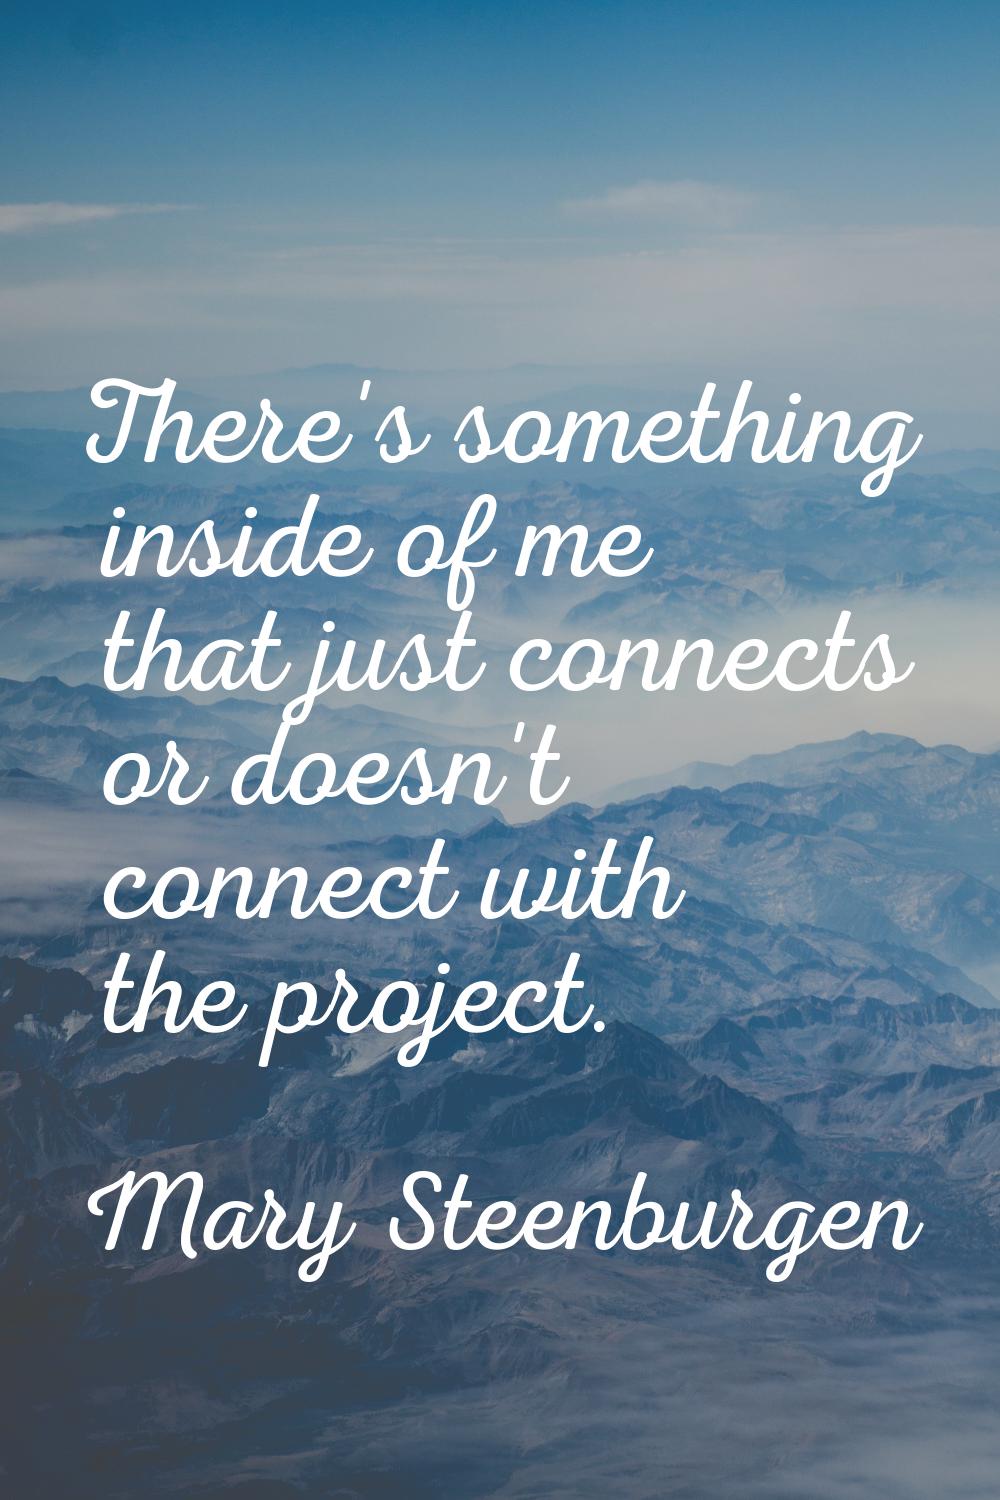 There's something inside of me that just connects or doesn't connect with the project.